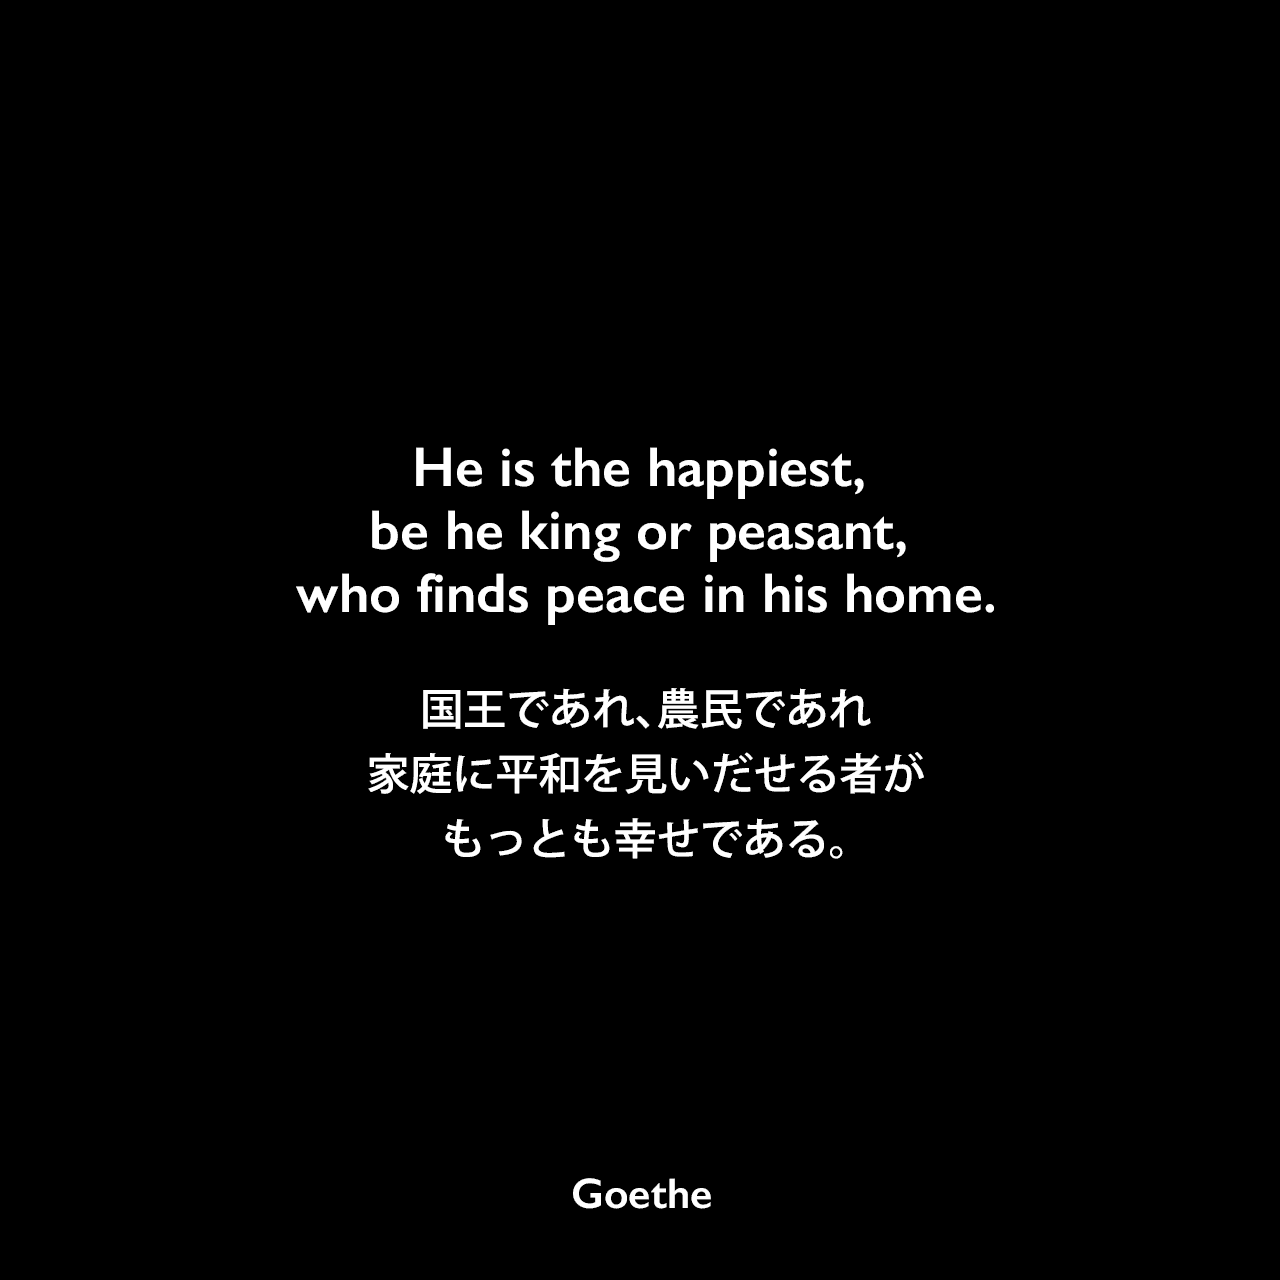 He is the happiest, be he king or peasant, who finds peace in his home.国王であれ、農民であれ、家庭に平和を見いだせる者が、もっとも幸せである。